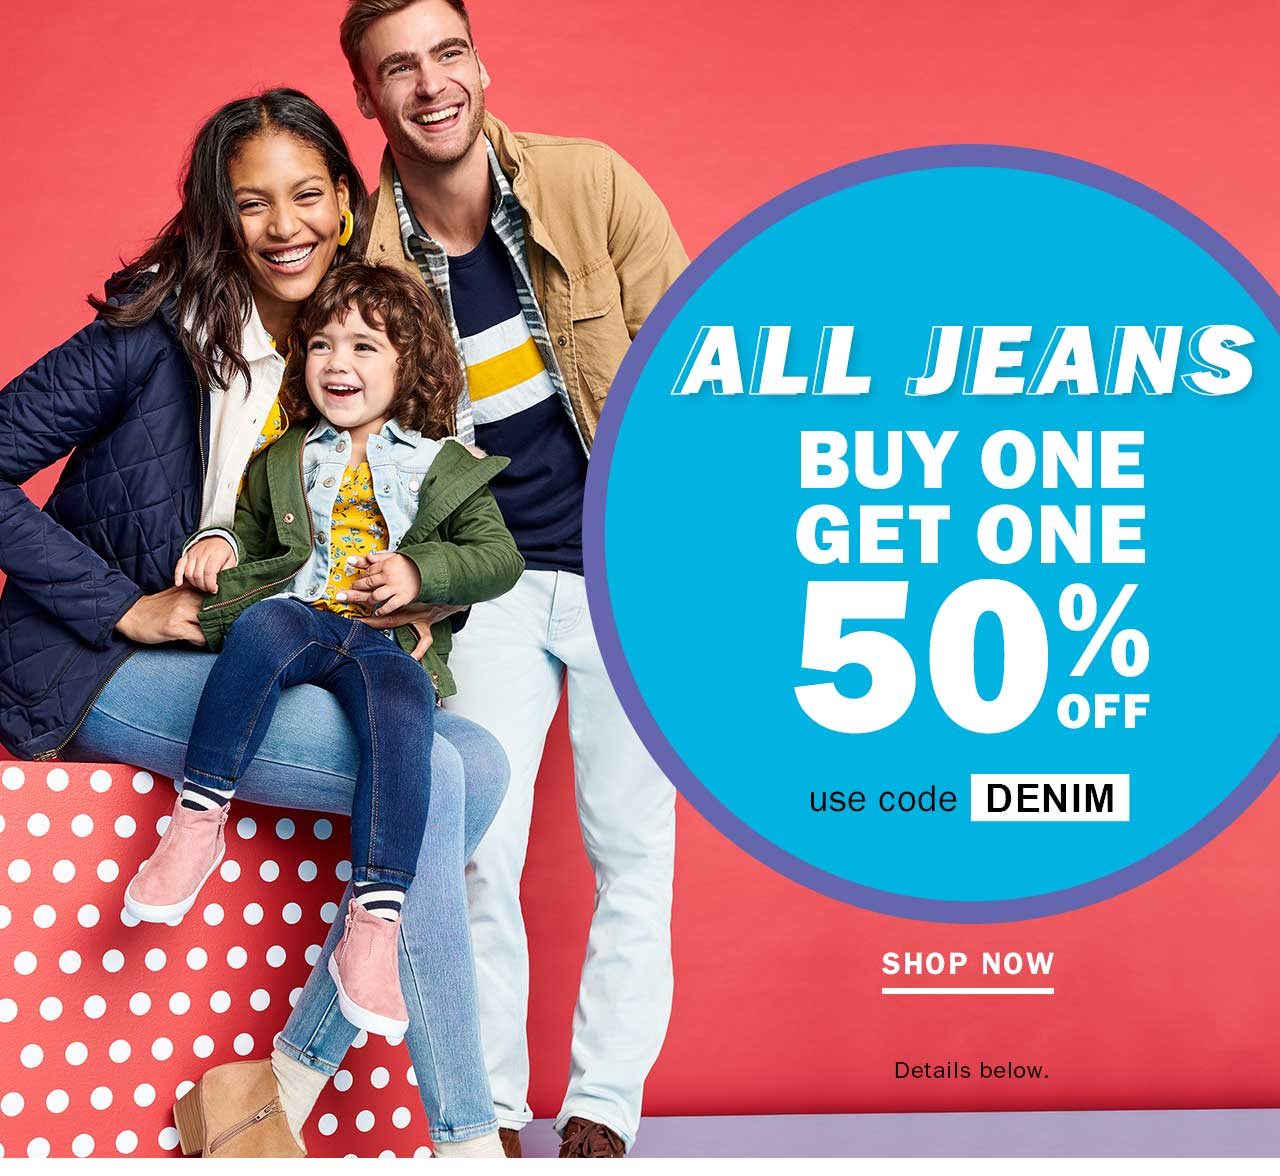 All jeans buy one get one 50% off